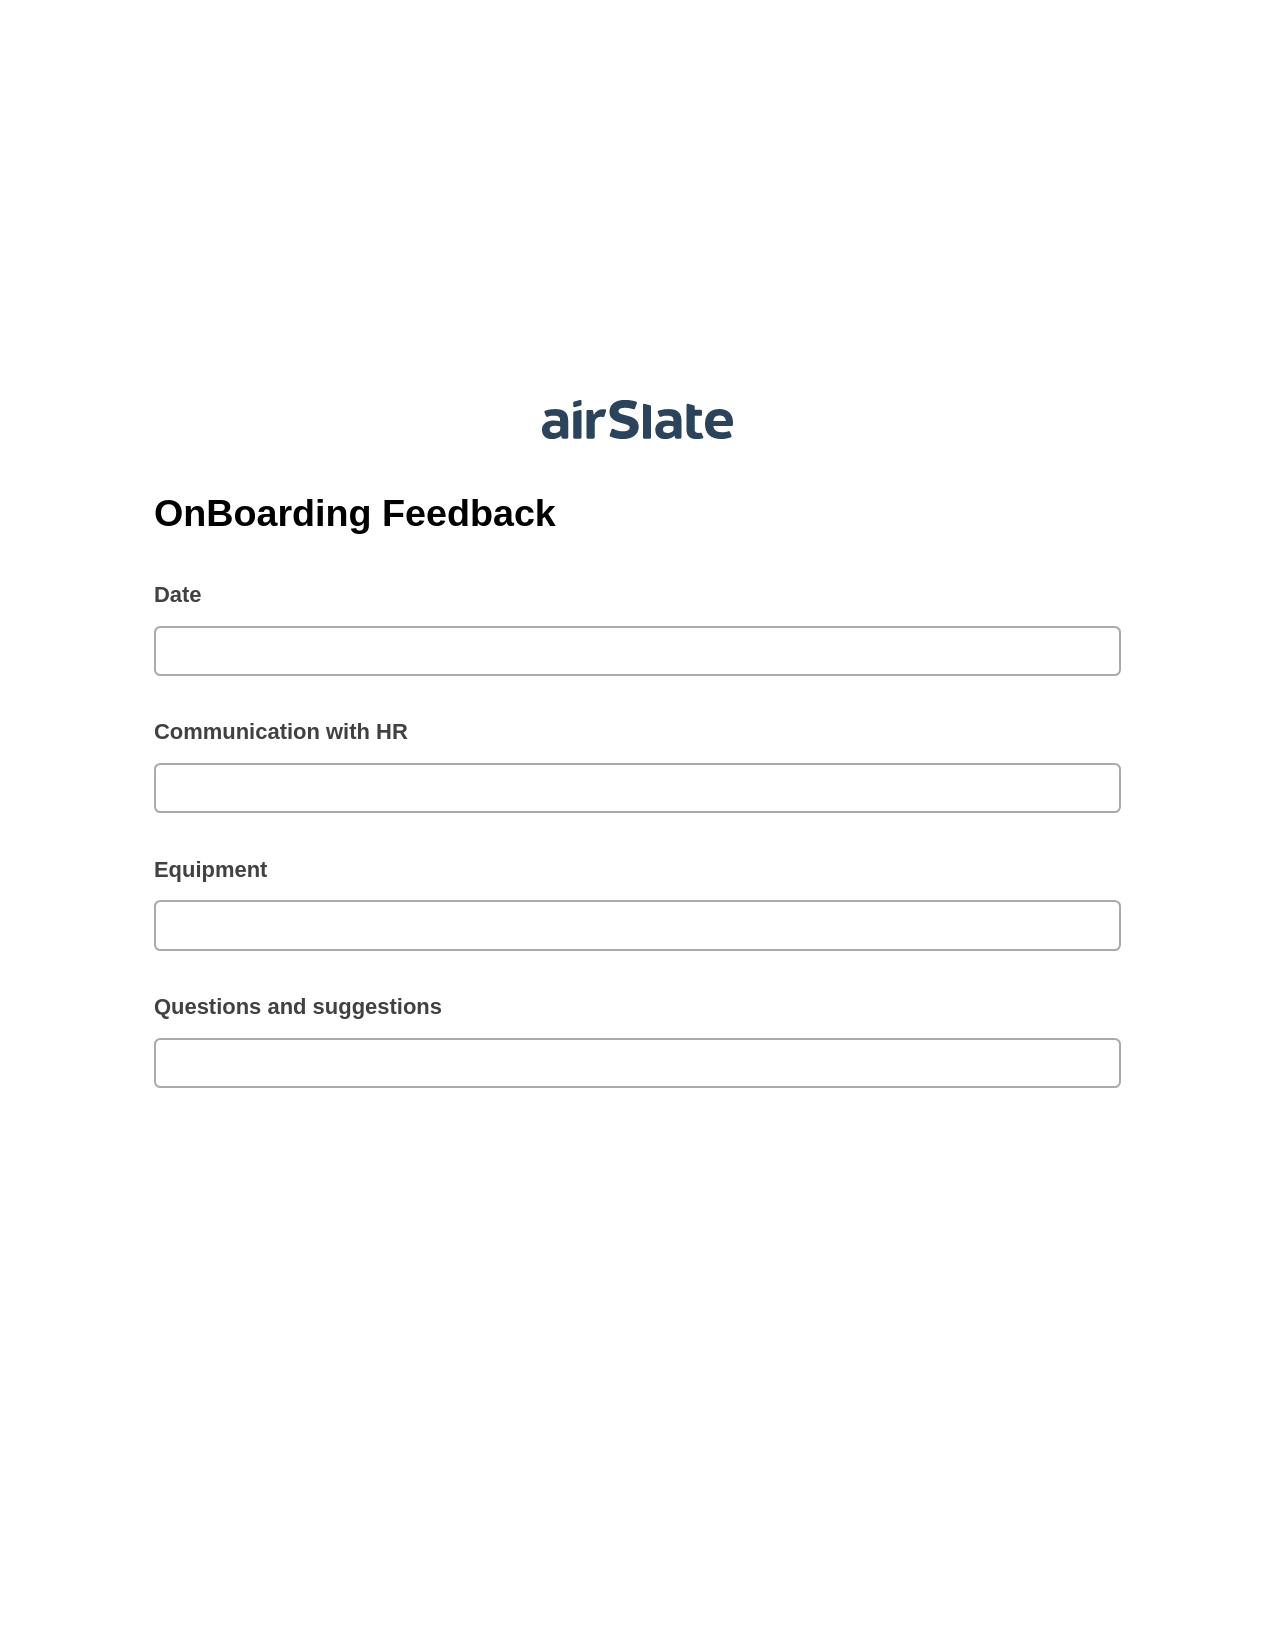 OnBoarding Feedback Pre-fill from CSV File Bot, Roles Reminder Bot, Slack Two-Way Binding Bot